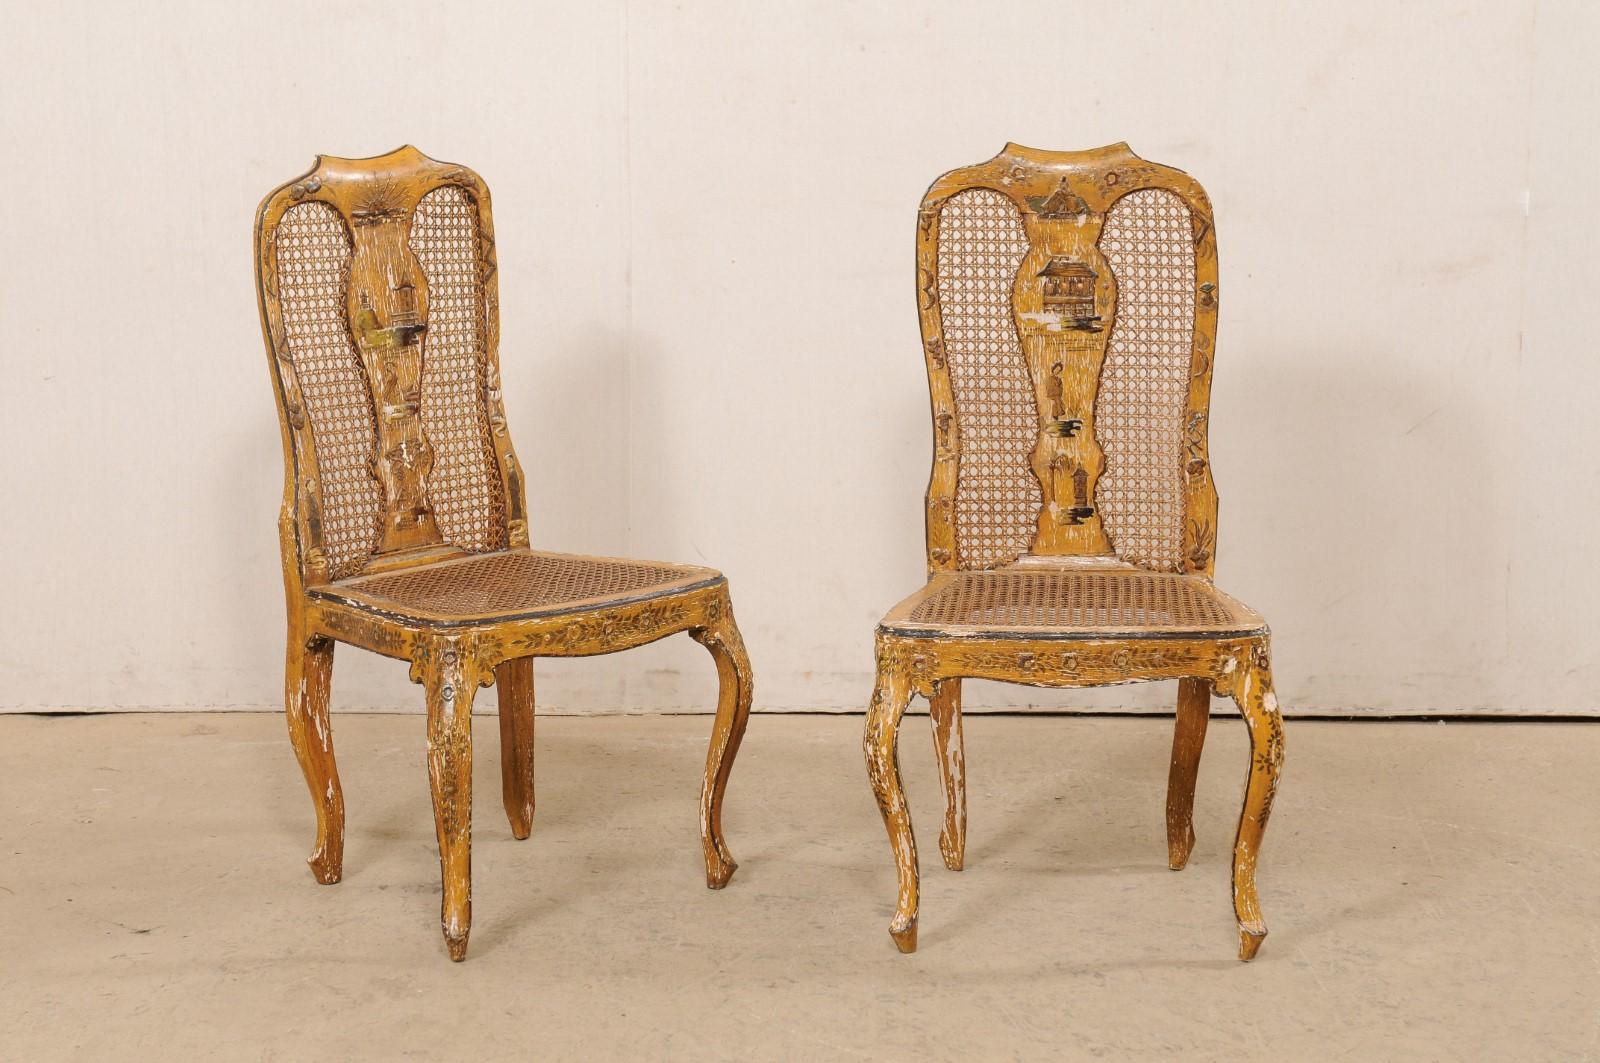 An Italian pair of wooden side chairs with chinoiserie and caning from the 18th century. This antique pair of chairs from Italy each features a shapely wood back with scooped top rail, a carved back-splat, with hand-caning framed within the splat